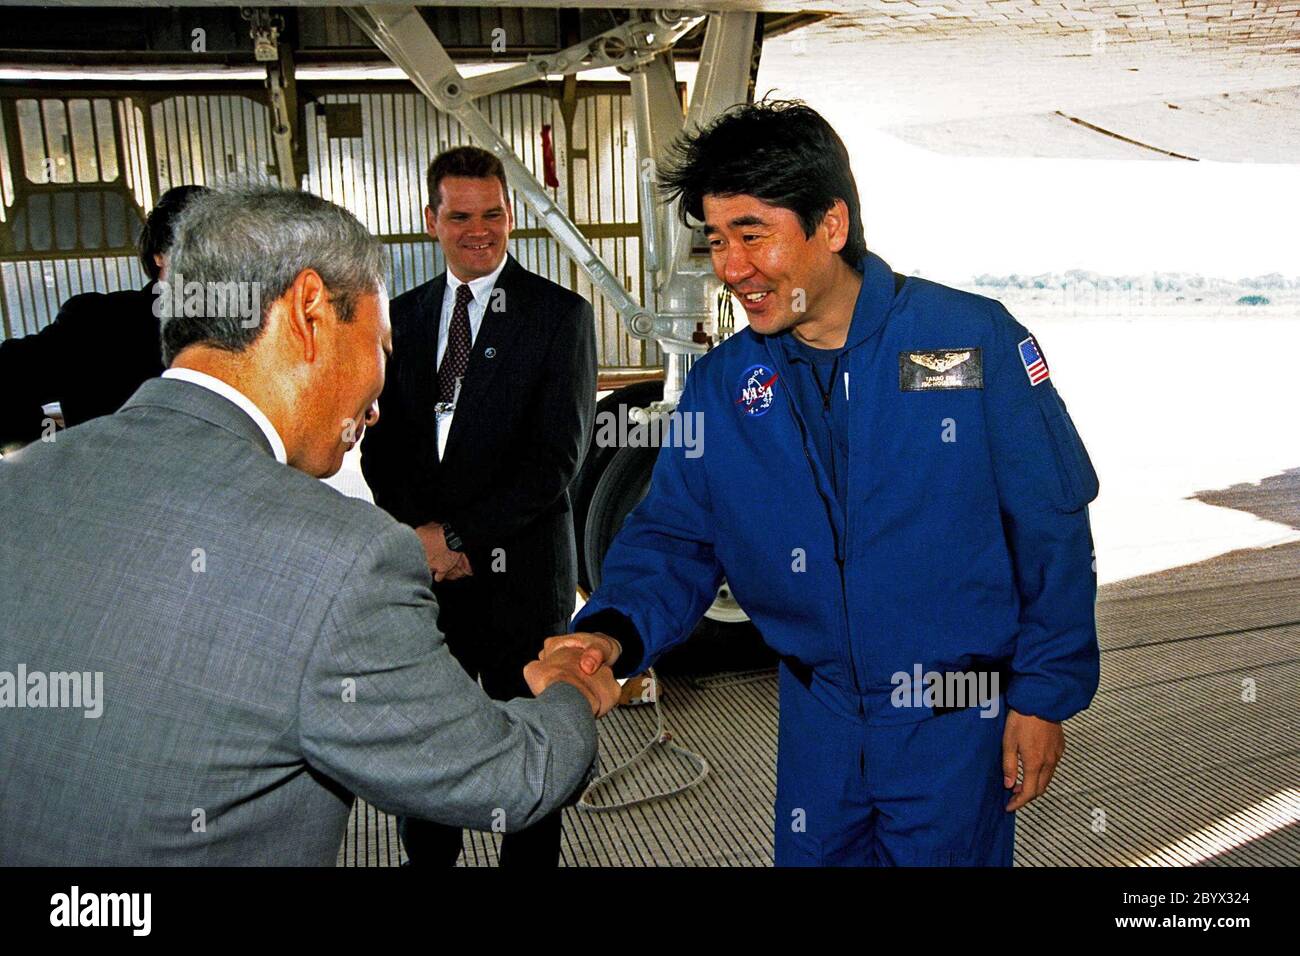 STS-87 Mission Specialist Takao Doi, Ph.D., of the National Space Development Agency (NASDA) of Japan greets a NASDA official shortly after the orbiter Columbia returned to KSC, touching down on Runway 33 at KSC's Shuttle Landing Facility. STS-87 concluded its mission with a main gear touchdown at 7:20:04 a.m. EST Dec. 5, drawing the 15-day, 16-hour and 34-minute-long mission of 6.5 million miles to a close. Also onboard the orbiter were Commander Kevin Kregel; Pilot Steven Lindsey; Mission Specialists Winston Scott and Kalpana Chawla, Ph.D.; and Payload Specialist Leonid Kadenyuk of the Natio Stock Photo